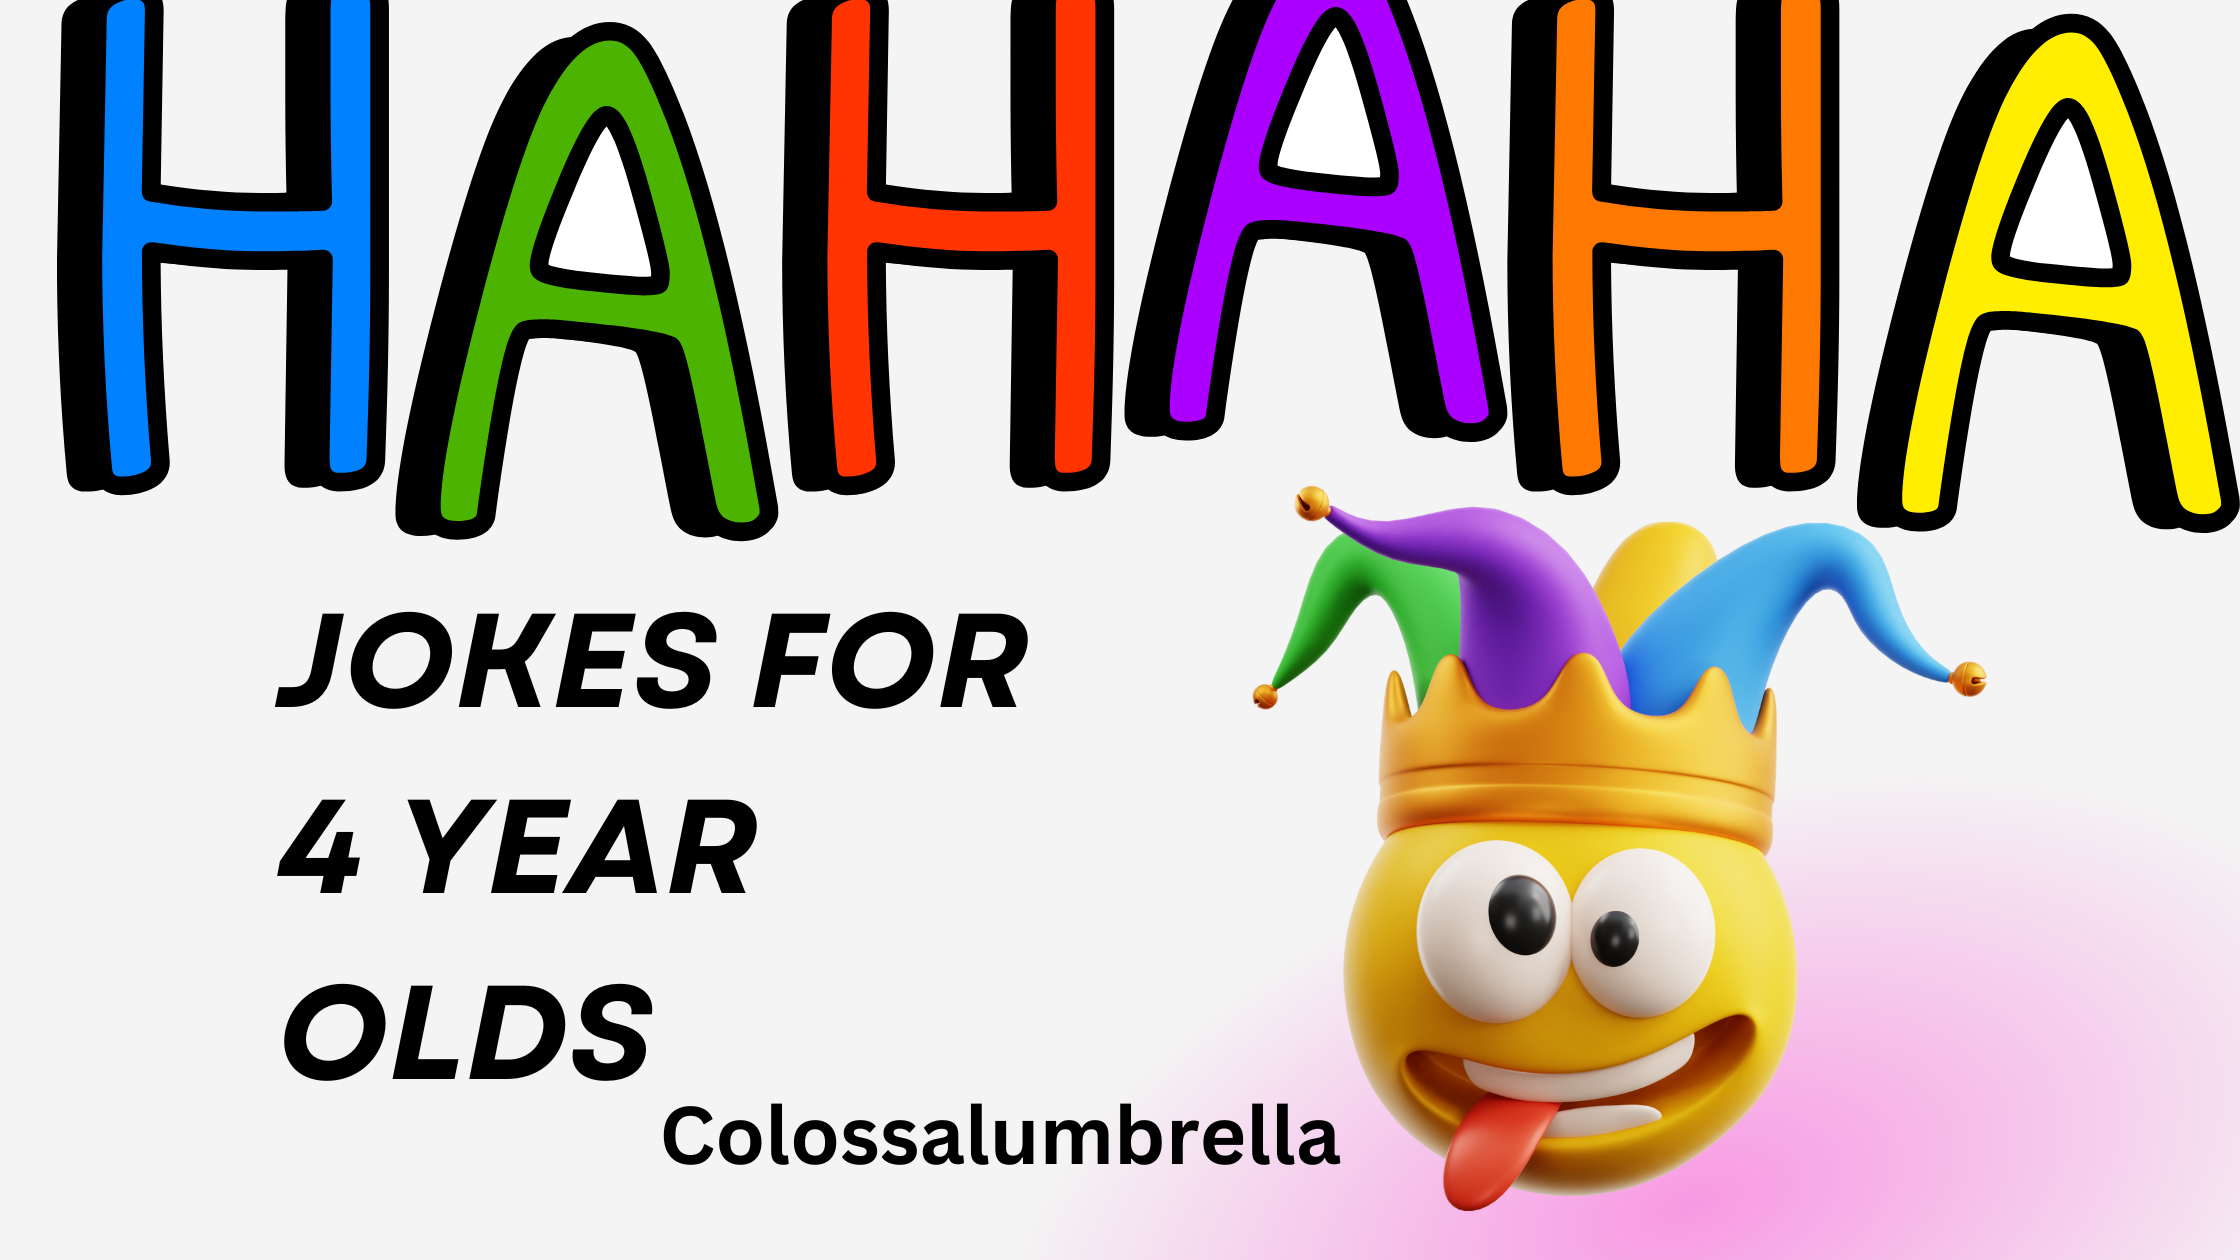 50+ Funny and cute jokes for 4 year olds